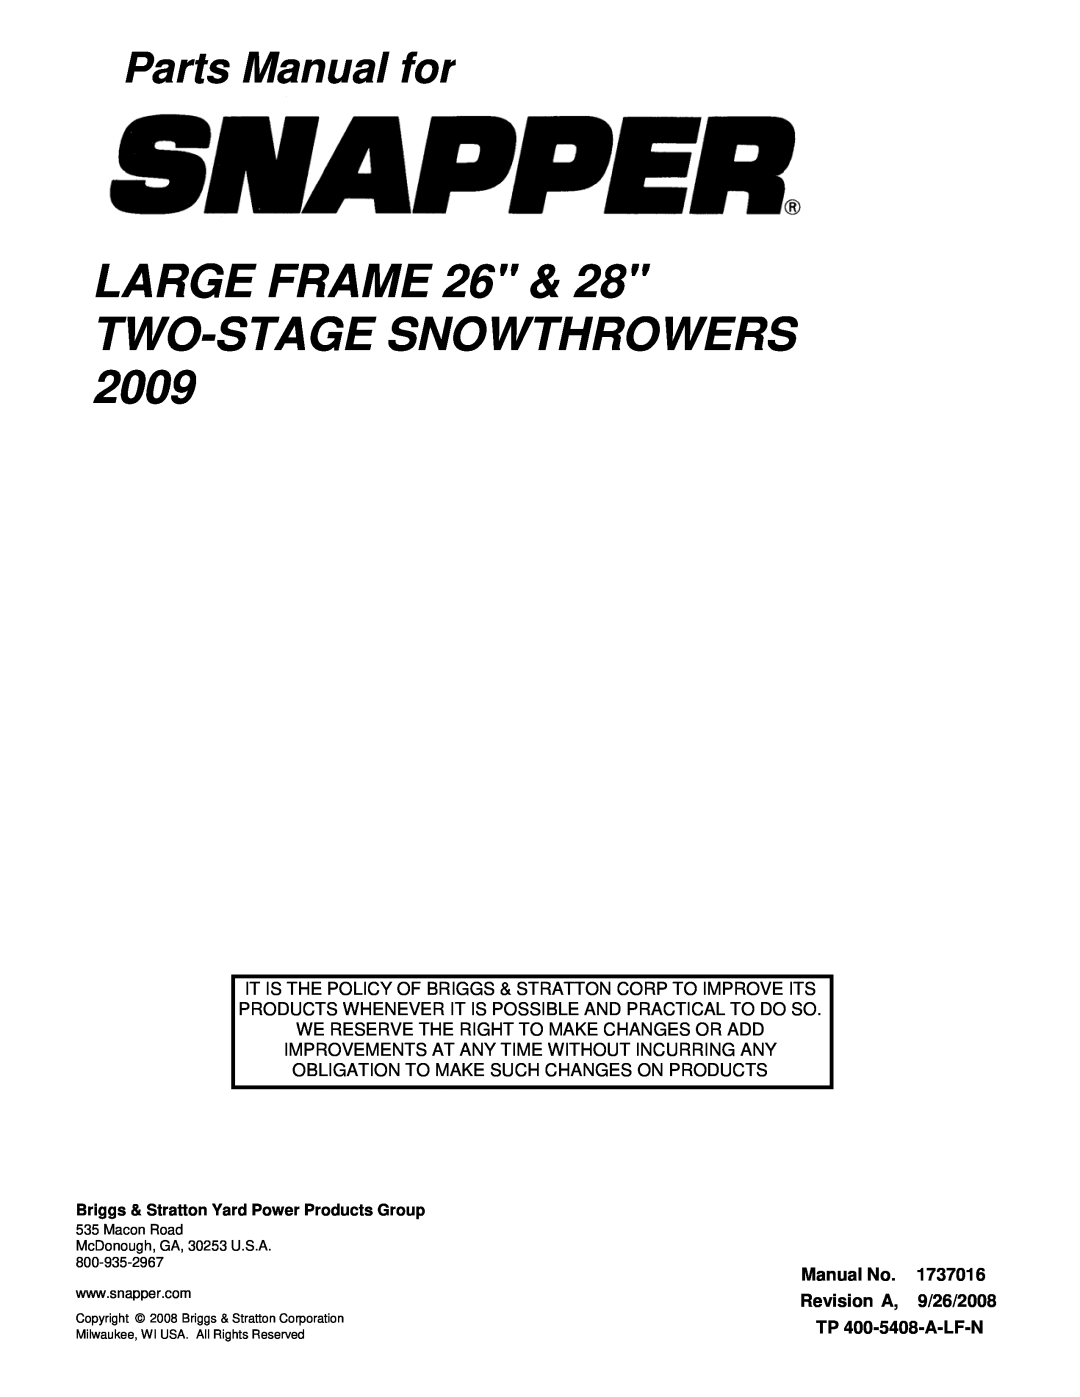 Snapper L1226E, L1428E LARGE FRAME 26 & TWO-STAGESNOWTHROWERS, Parts Manual for, Manual No, 1737016, Revision A, 9/26/2008 